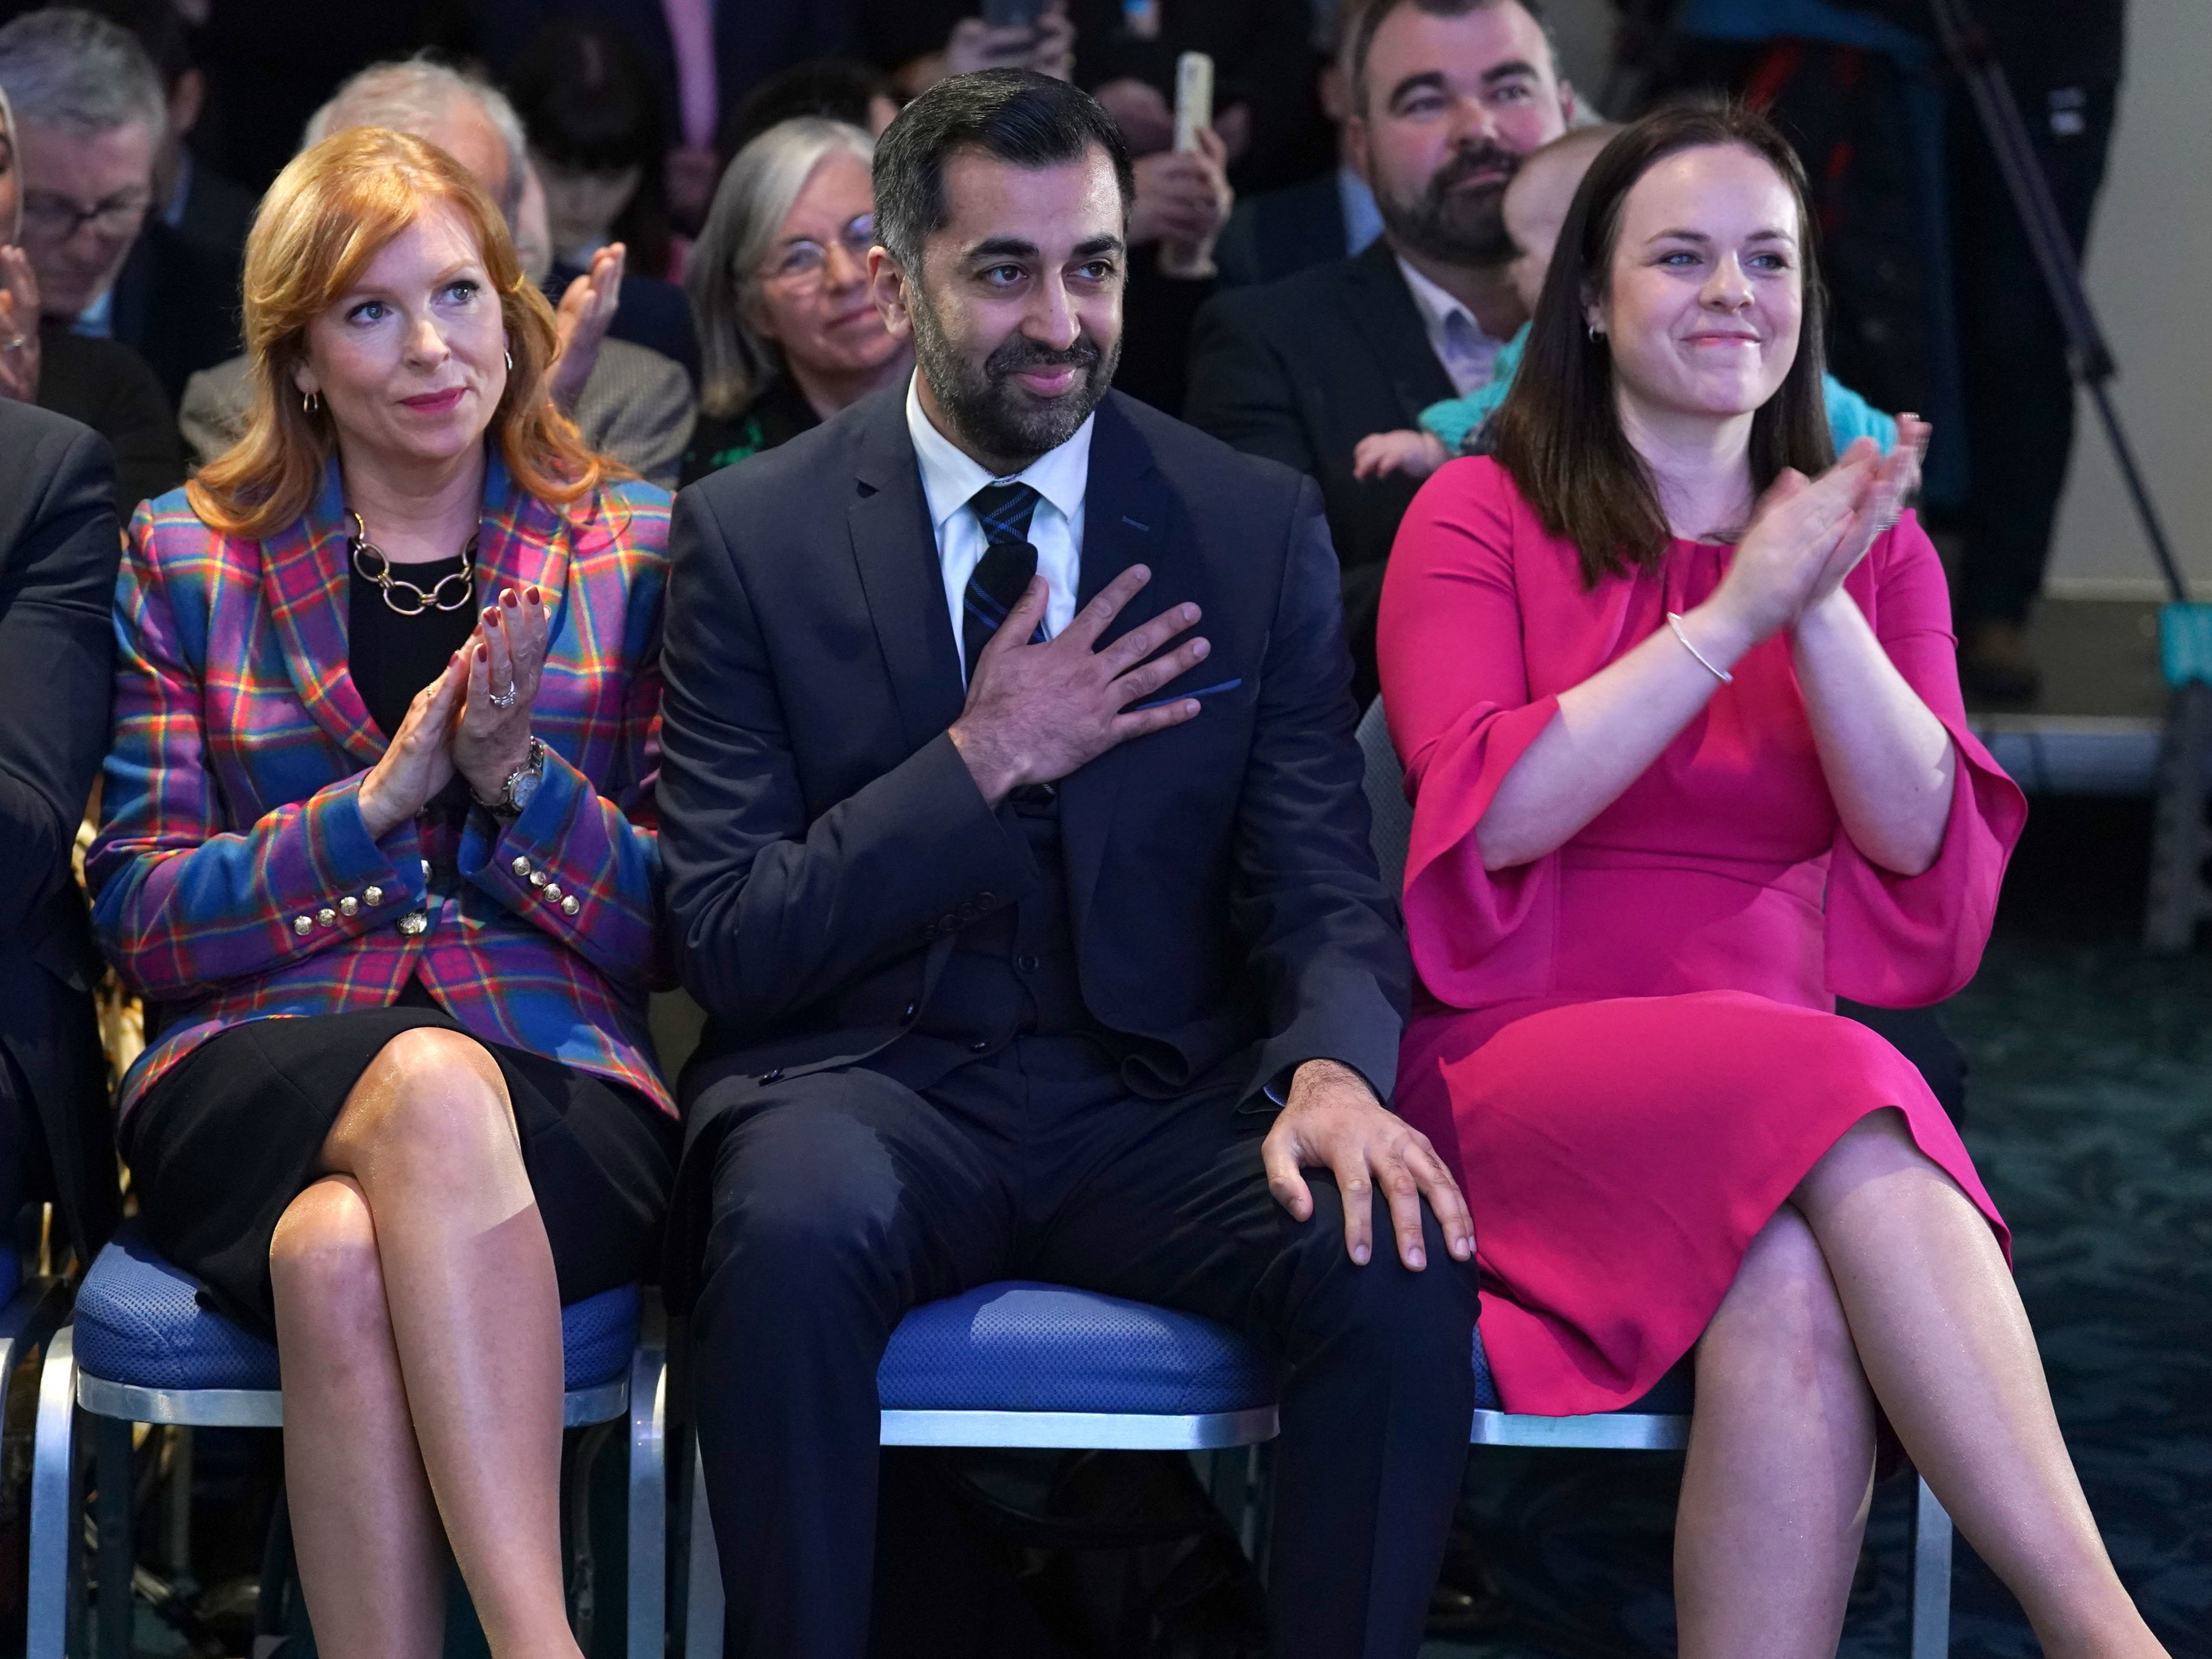 The moment Humza Yousaf is declared victor over Ash Regan (left) and Kate Forbes (right)